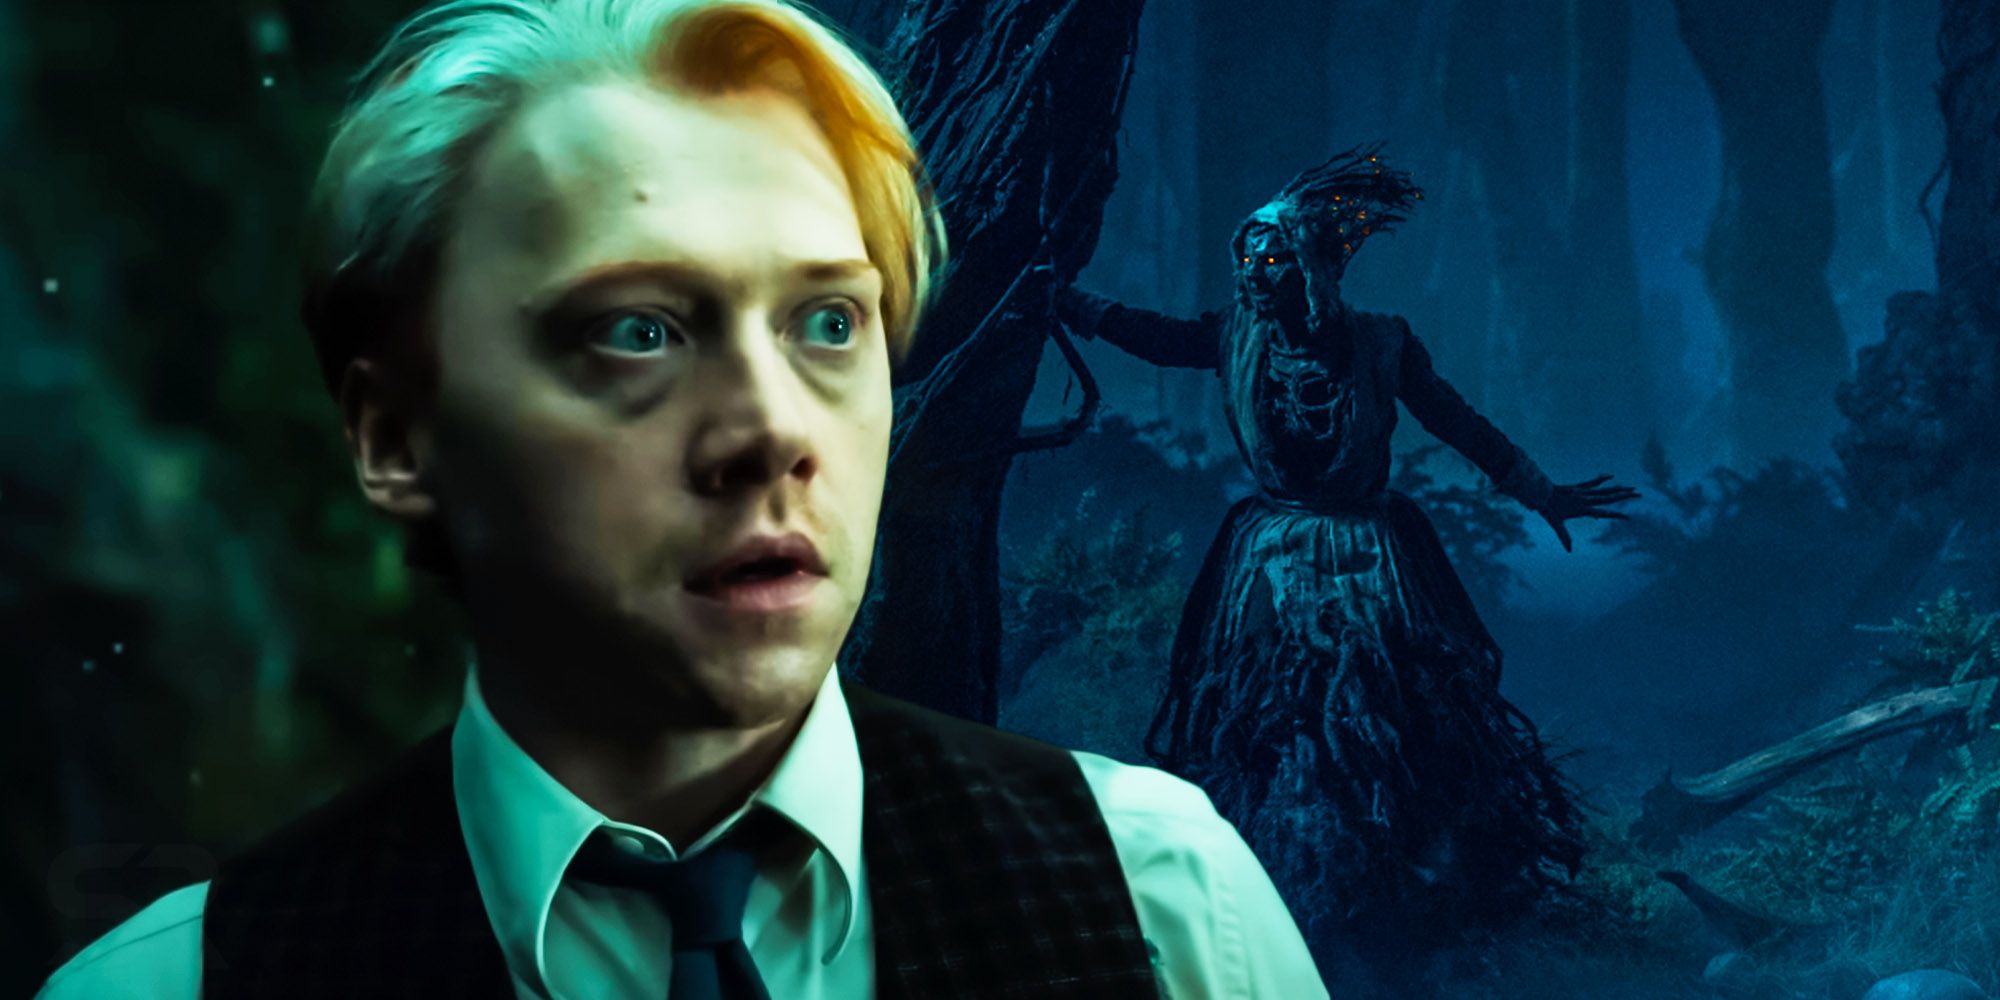 Dreams in the witch house rupert grint ending explained